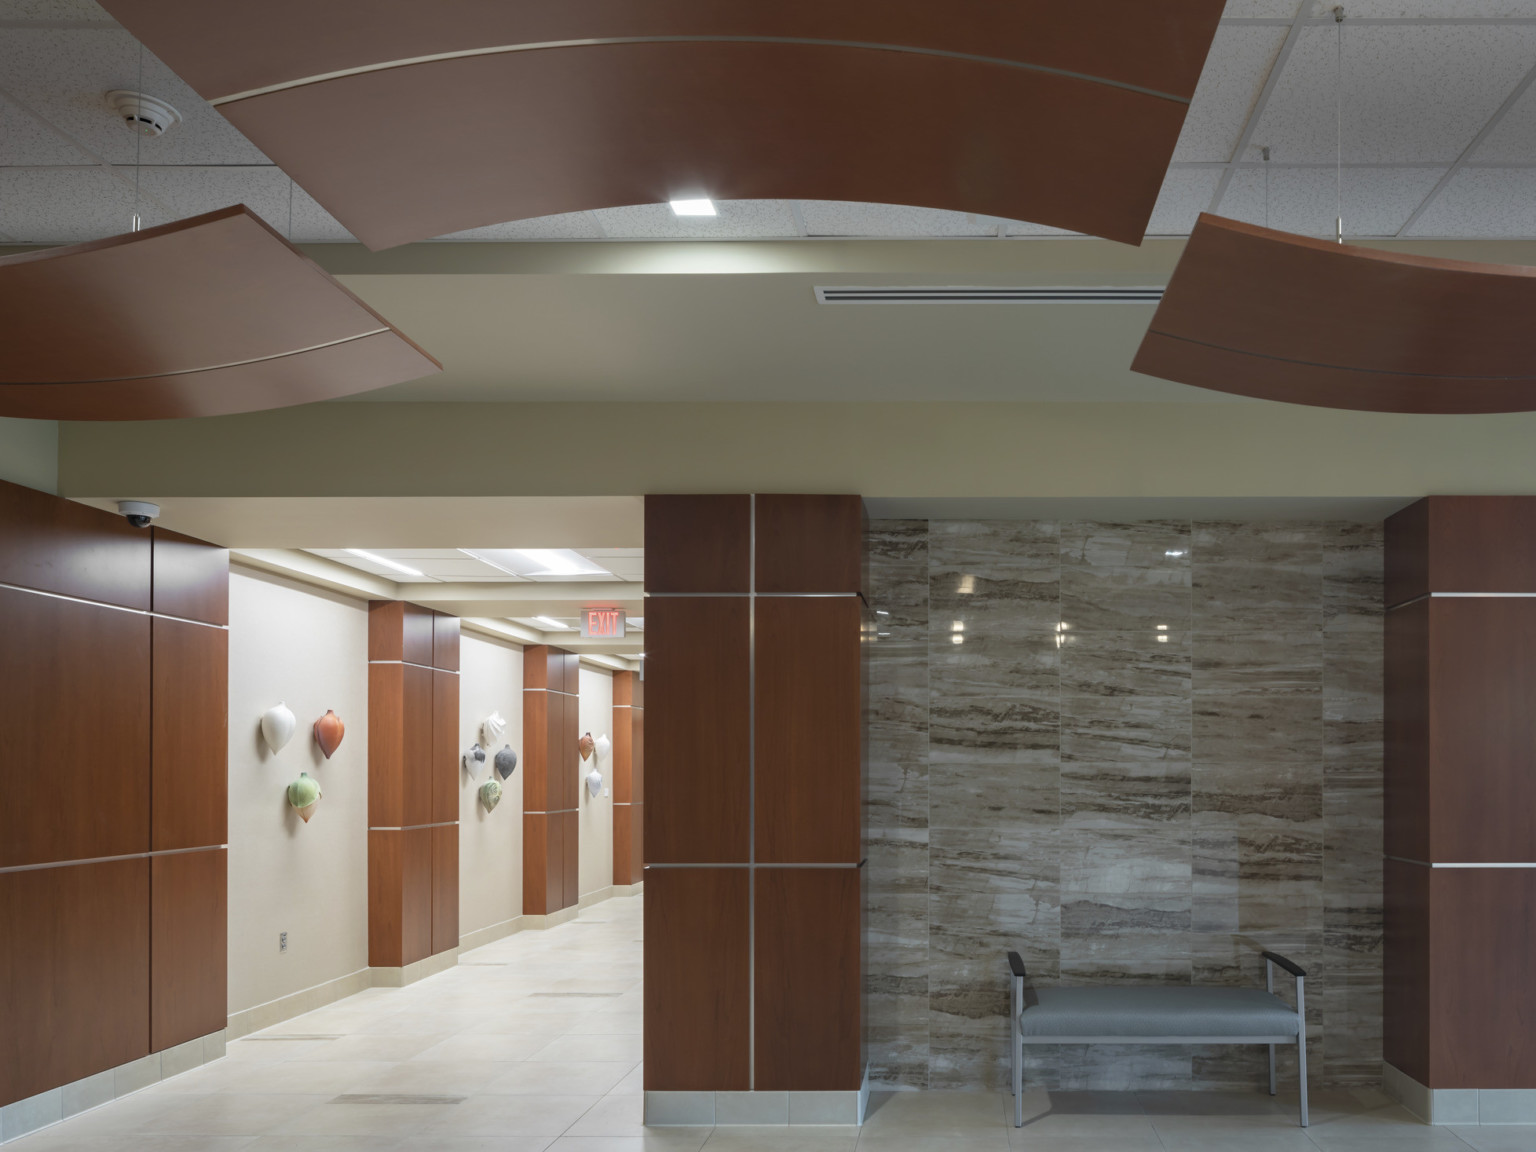 Corner intersection of hallway with wood accents on wall and matching acoustical panels. Abstract wall panels on left wall